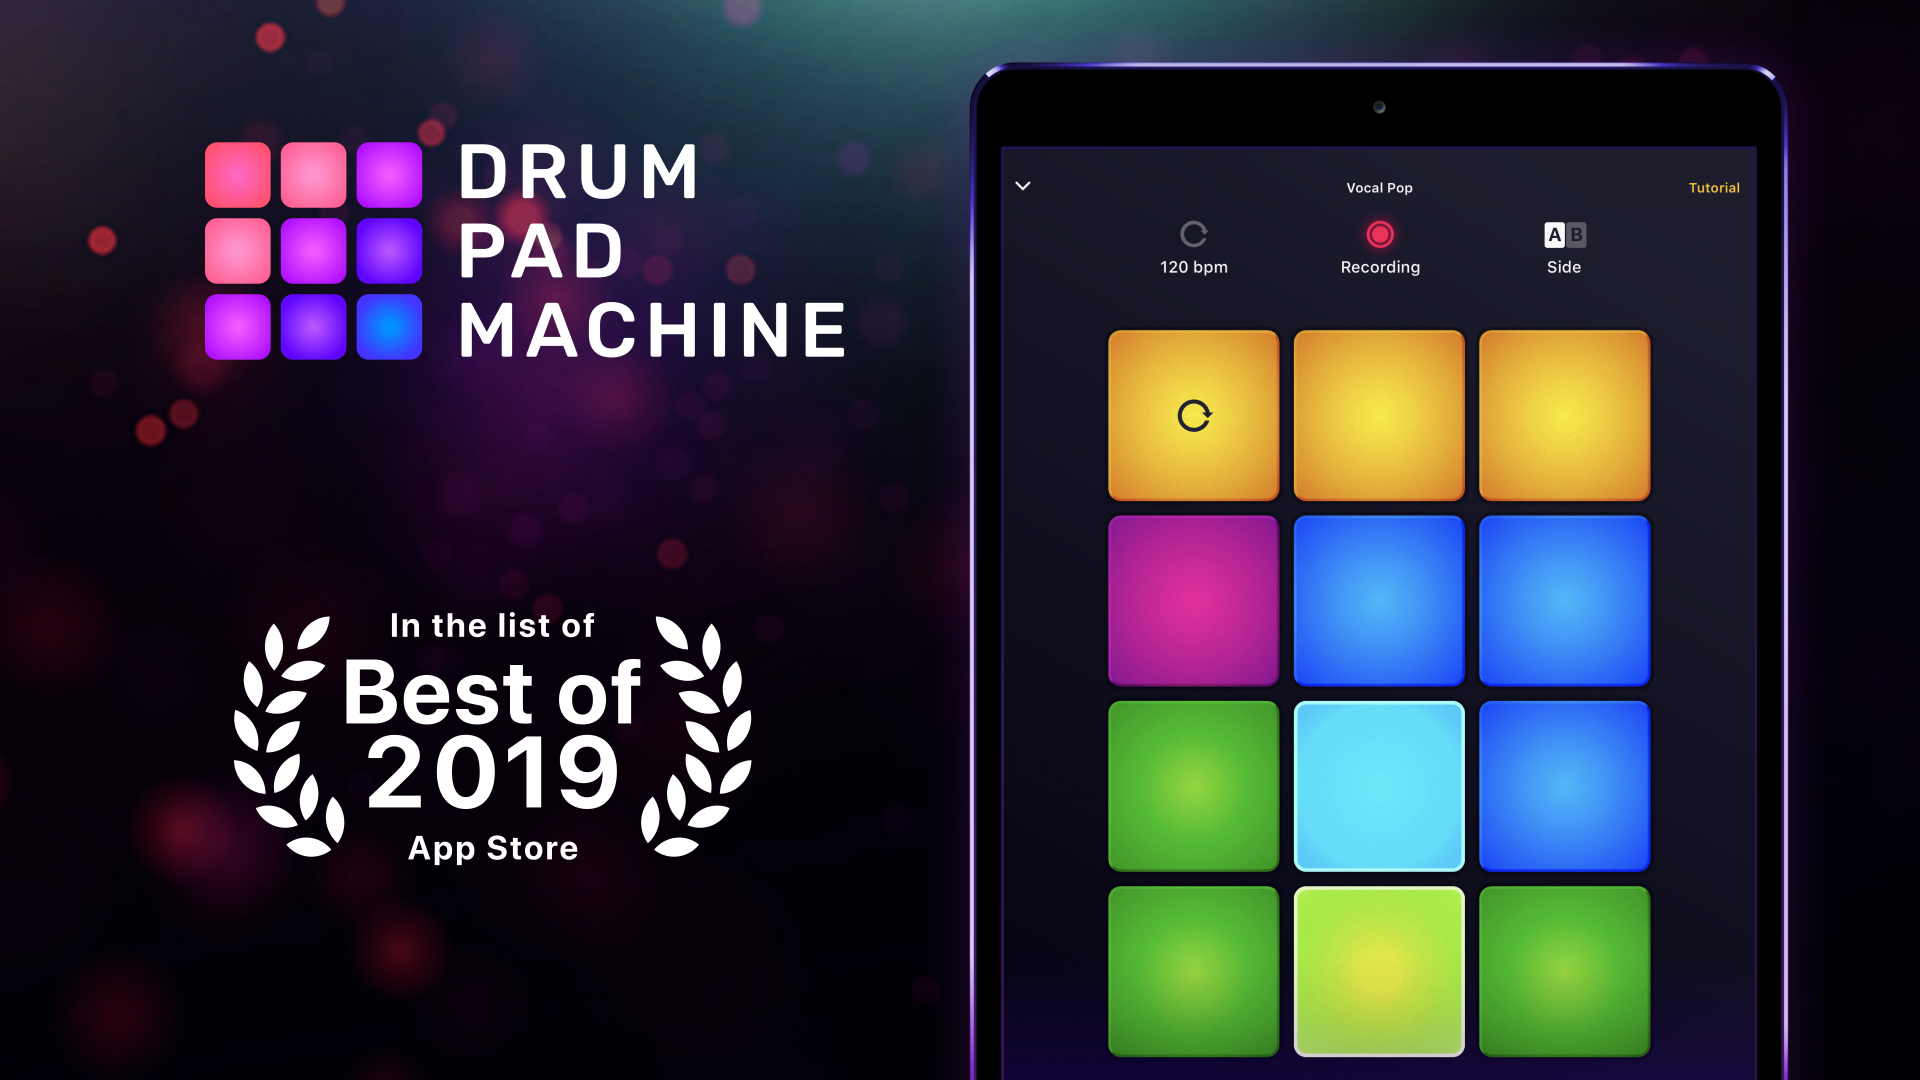 Drum Pad Machine by Easybrain is featured in Best of 2019